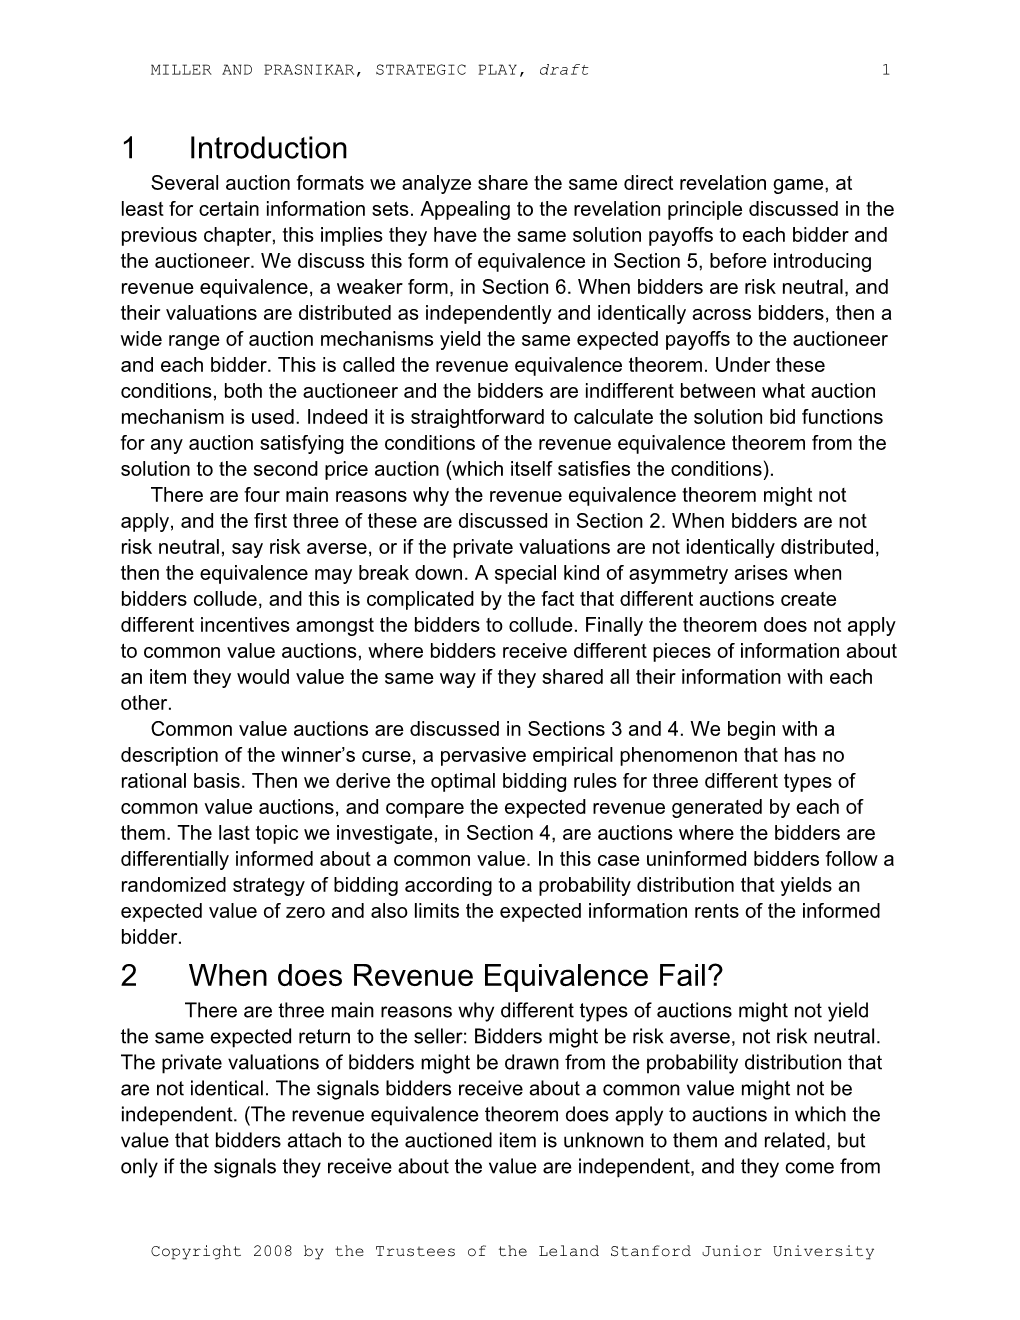 1 Introduction 2 When Does Revenue Equivalence Fail?